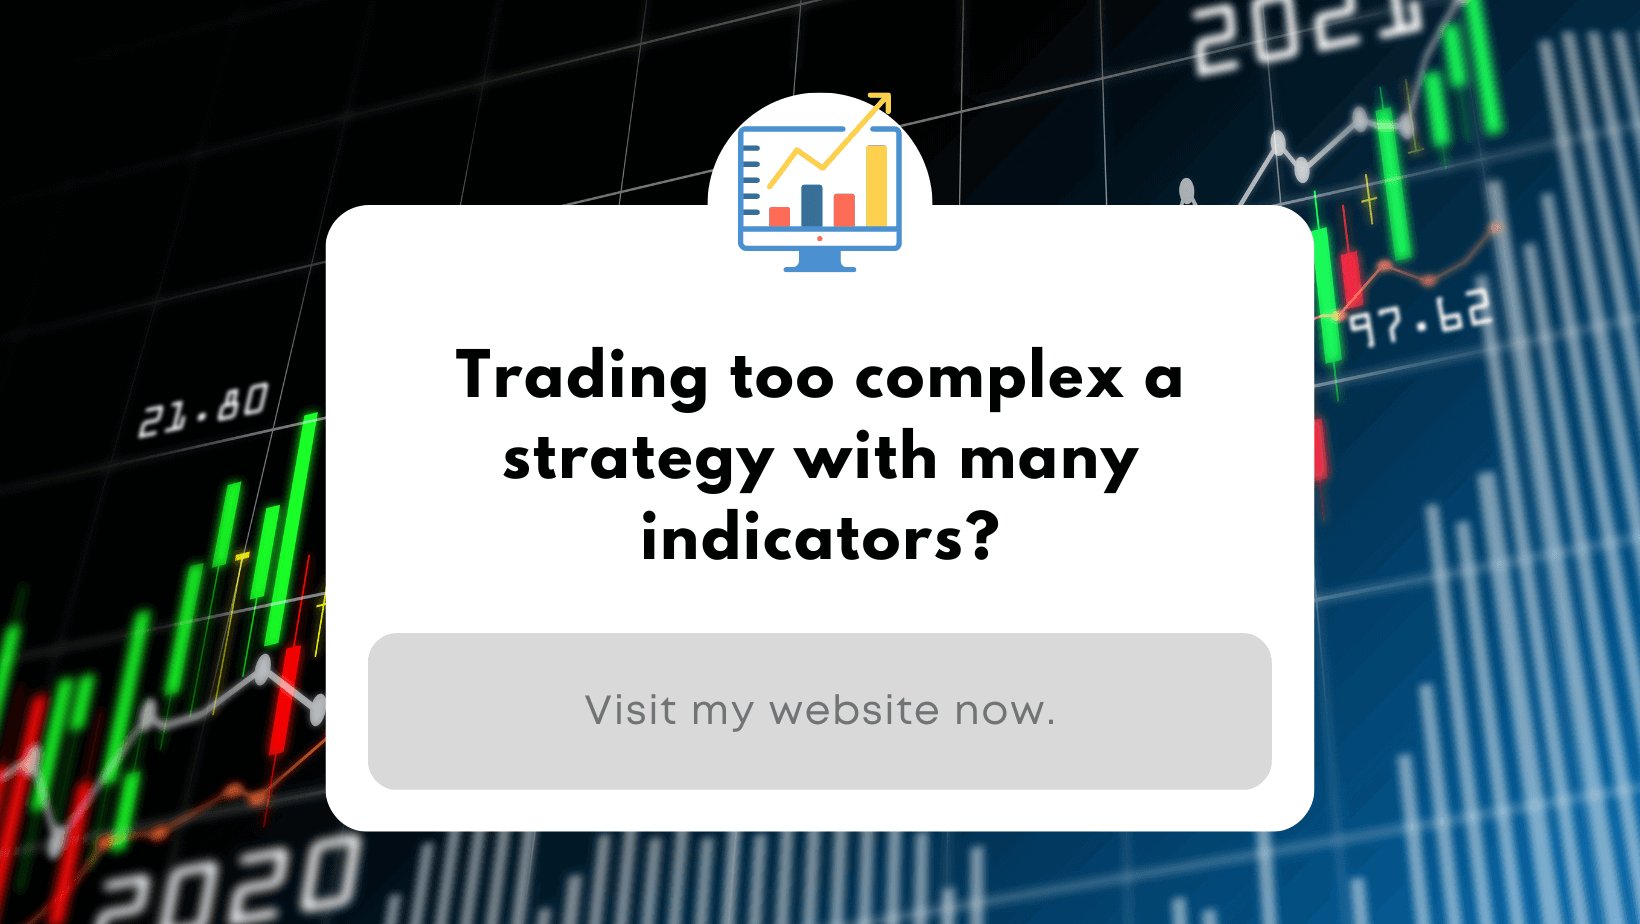 Trading too complex a strategy with many indicators?